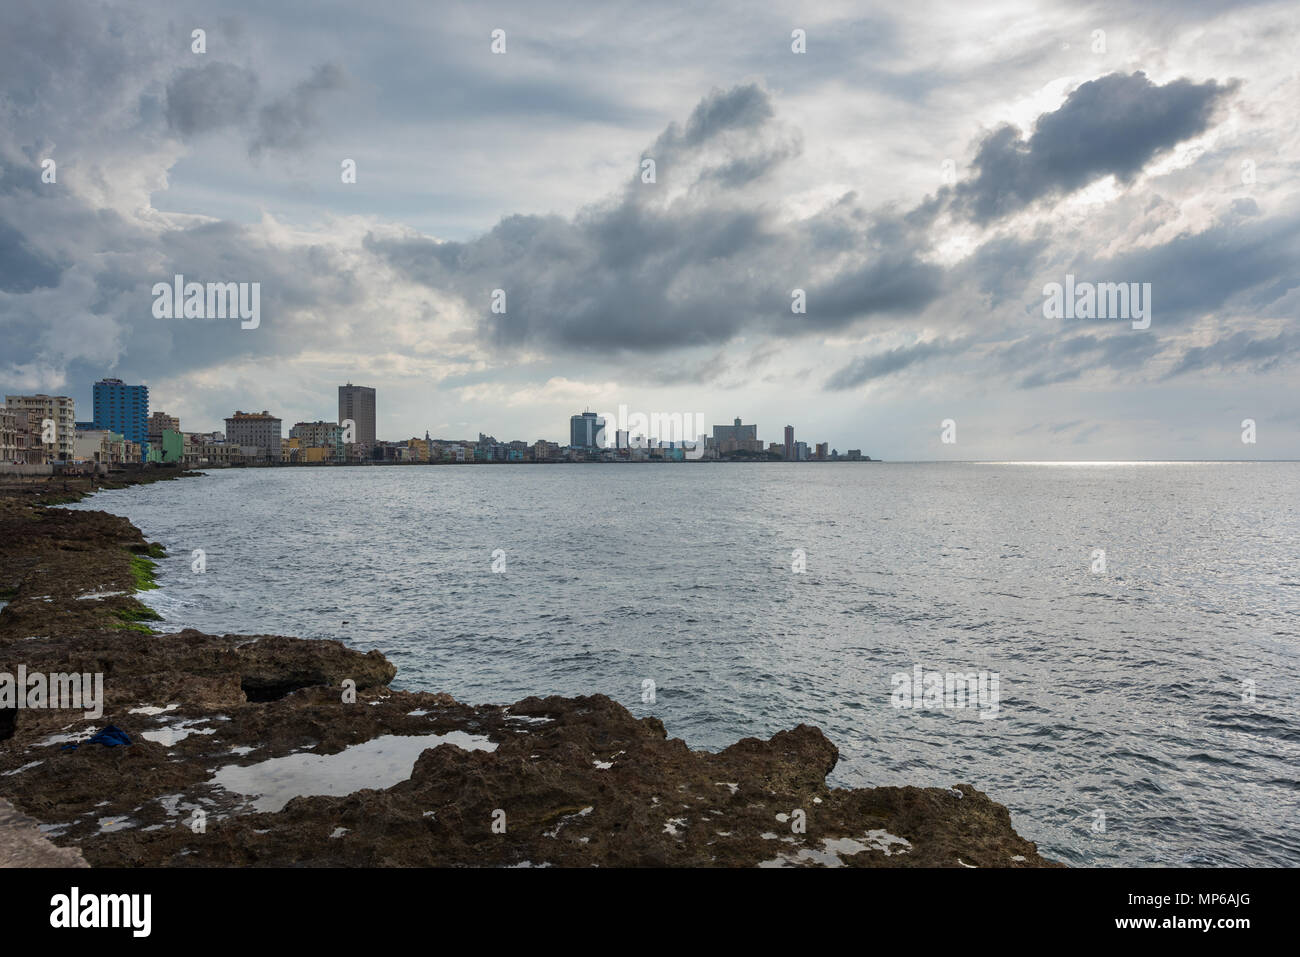 A view of the Havana Cuba Skyline from between Havana Centro and Havana Vieja. In the distance the neighborhood of Vedado is visible. Stock Photo